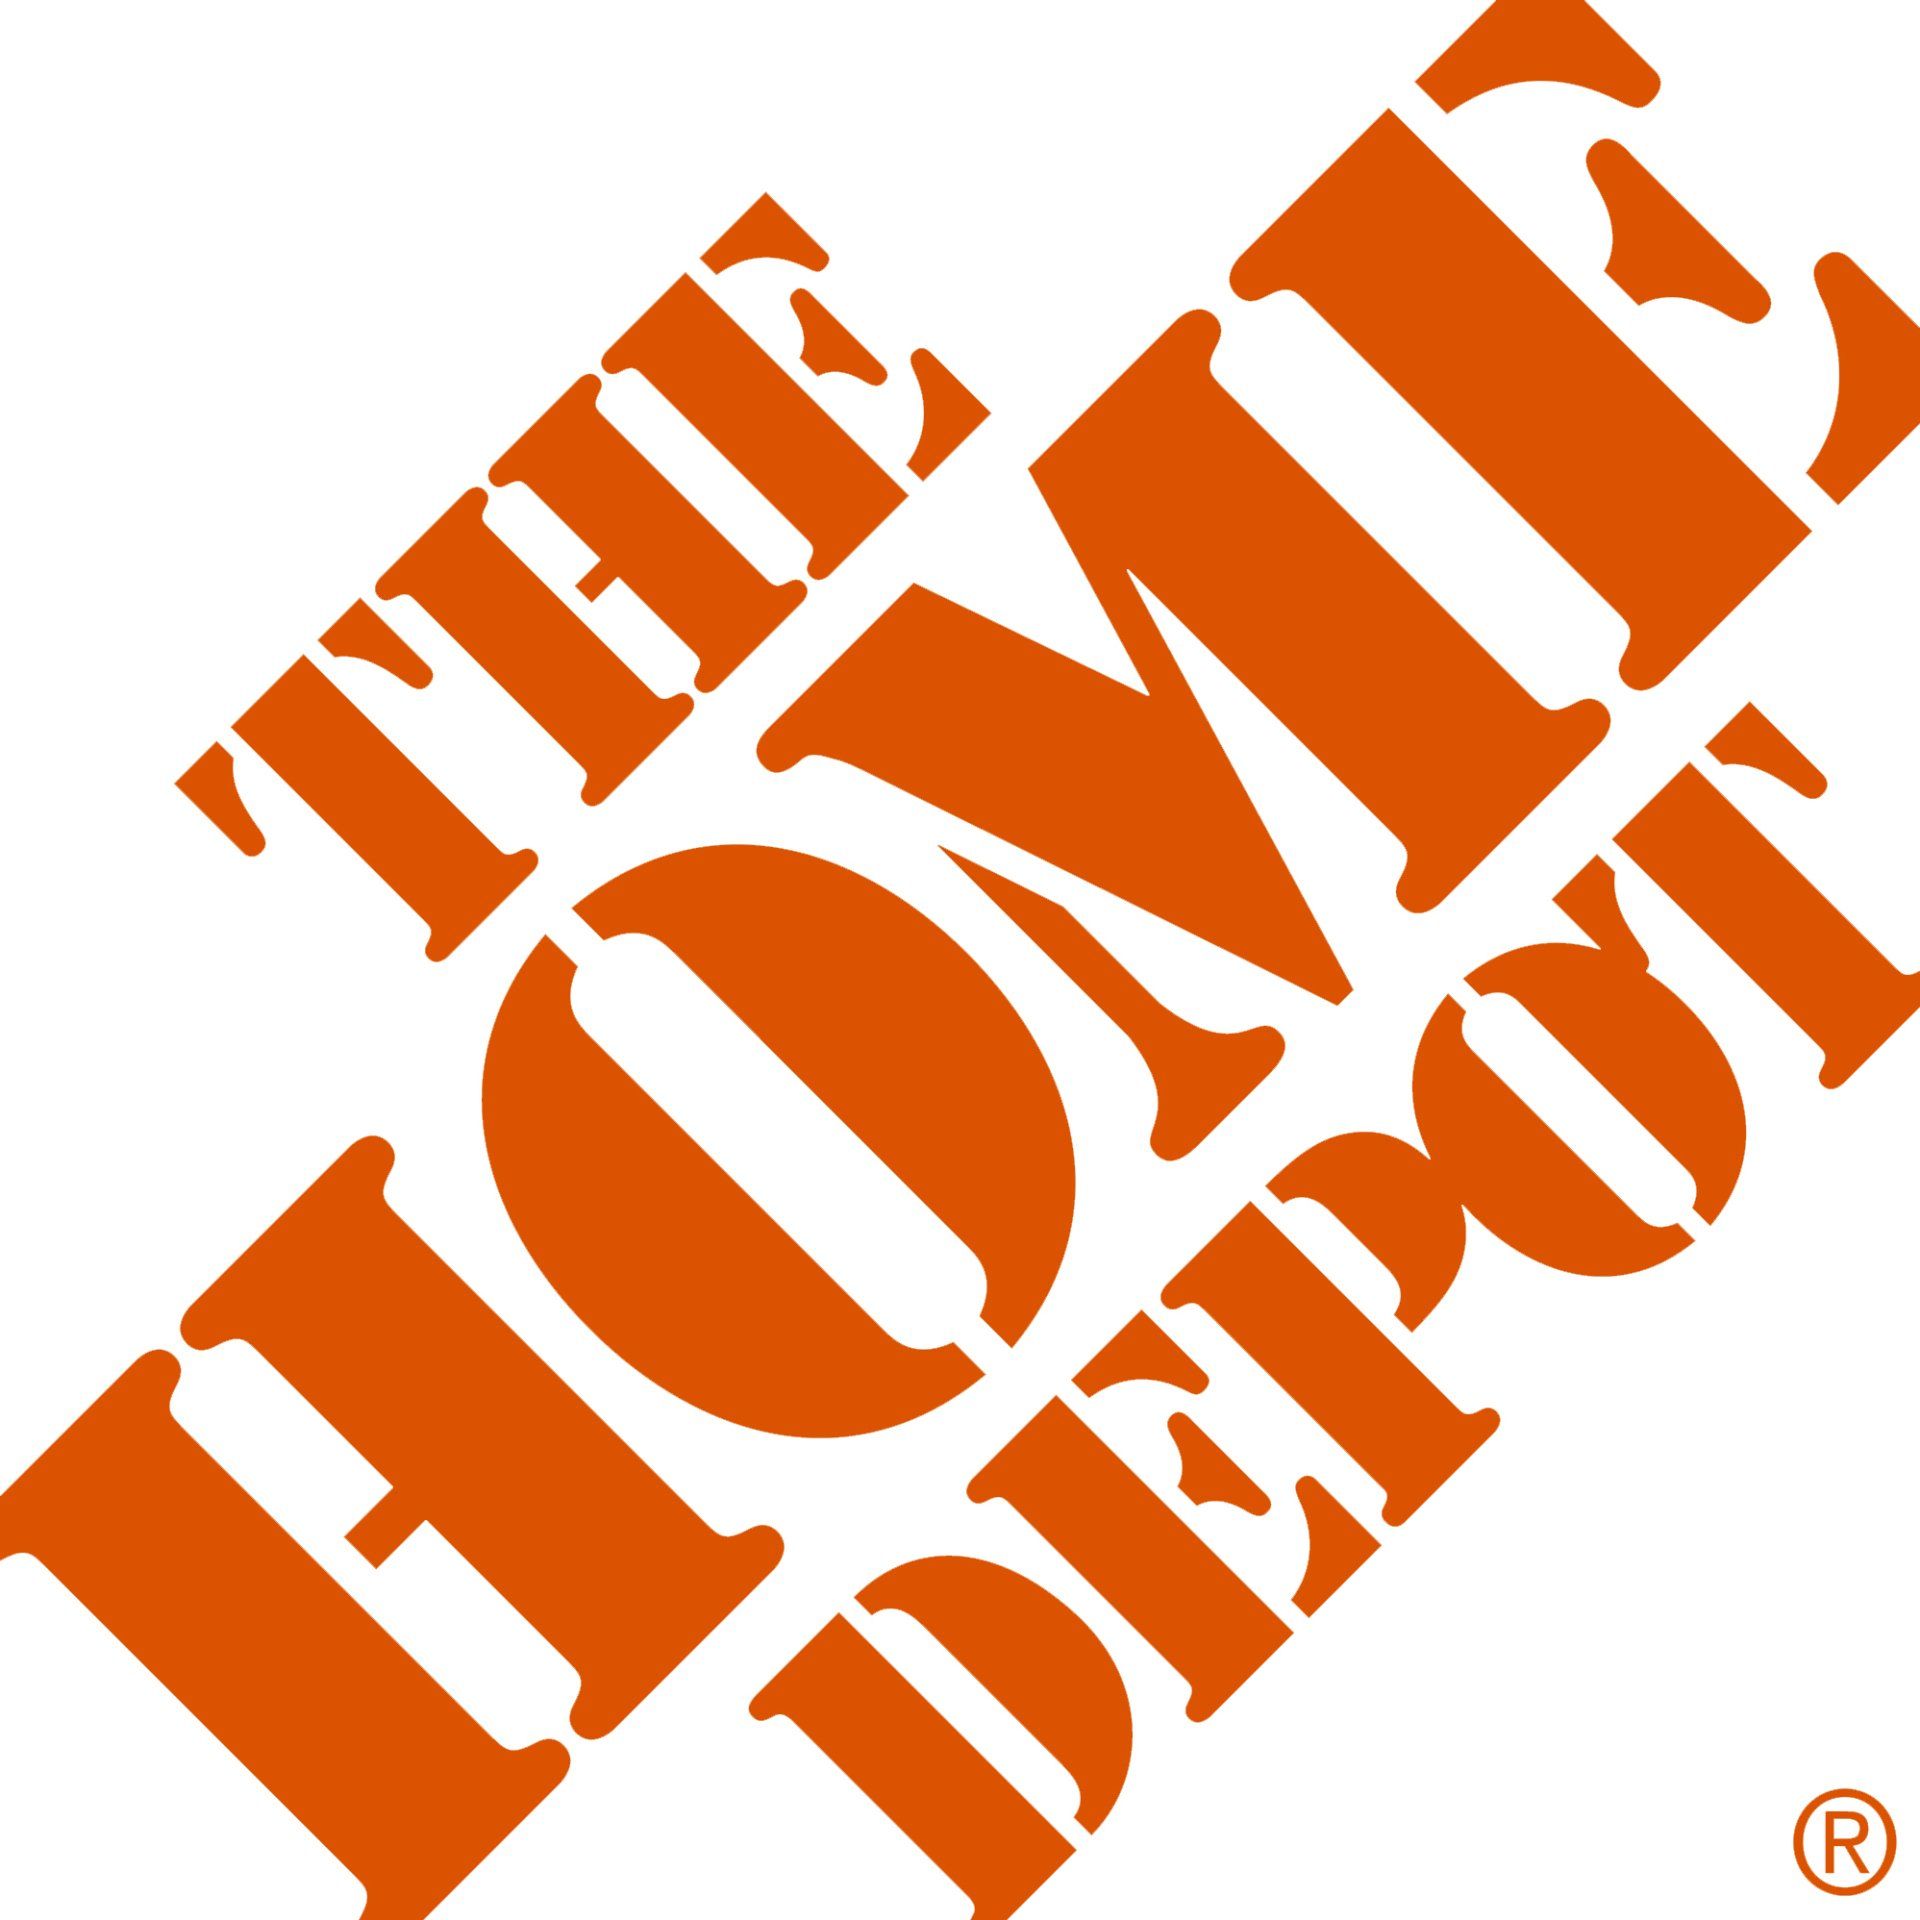 Home Depot on-demand construction materials delivery 